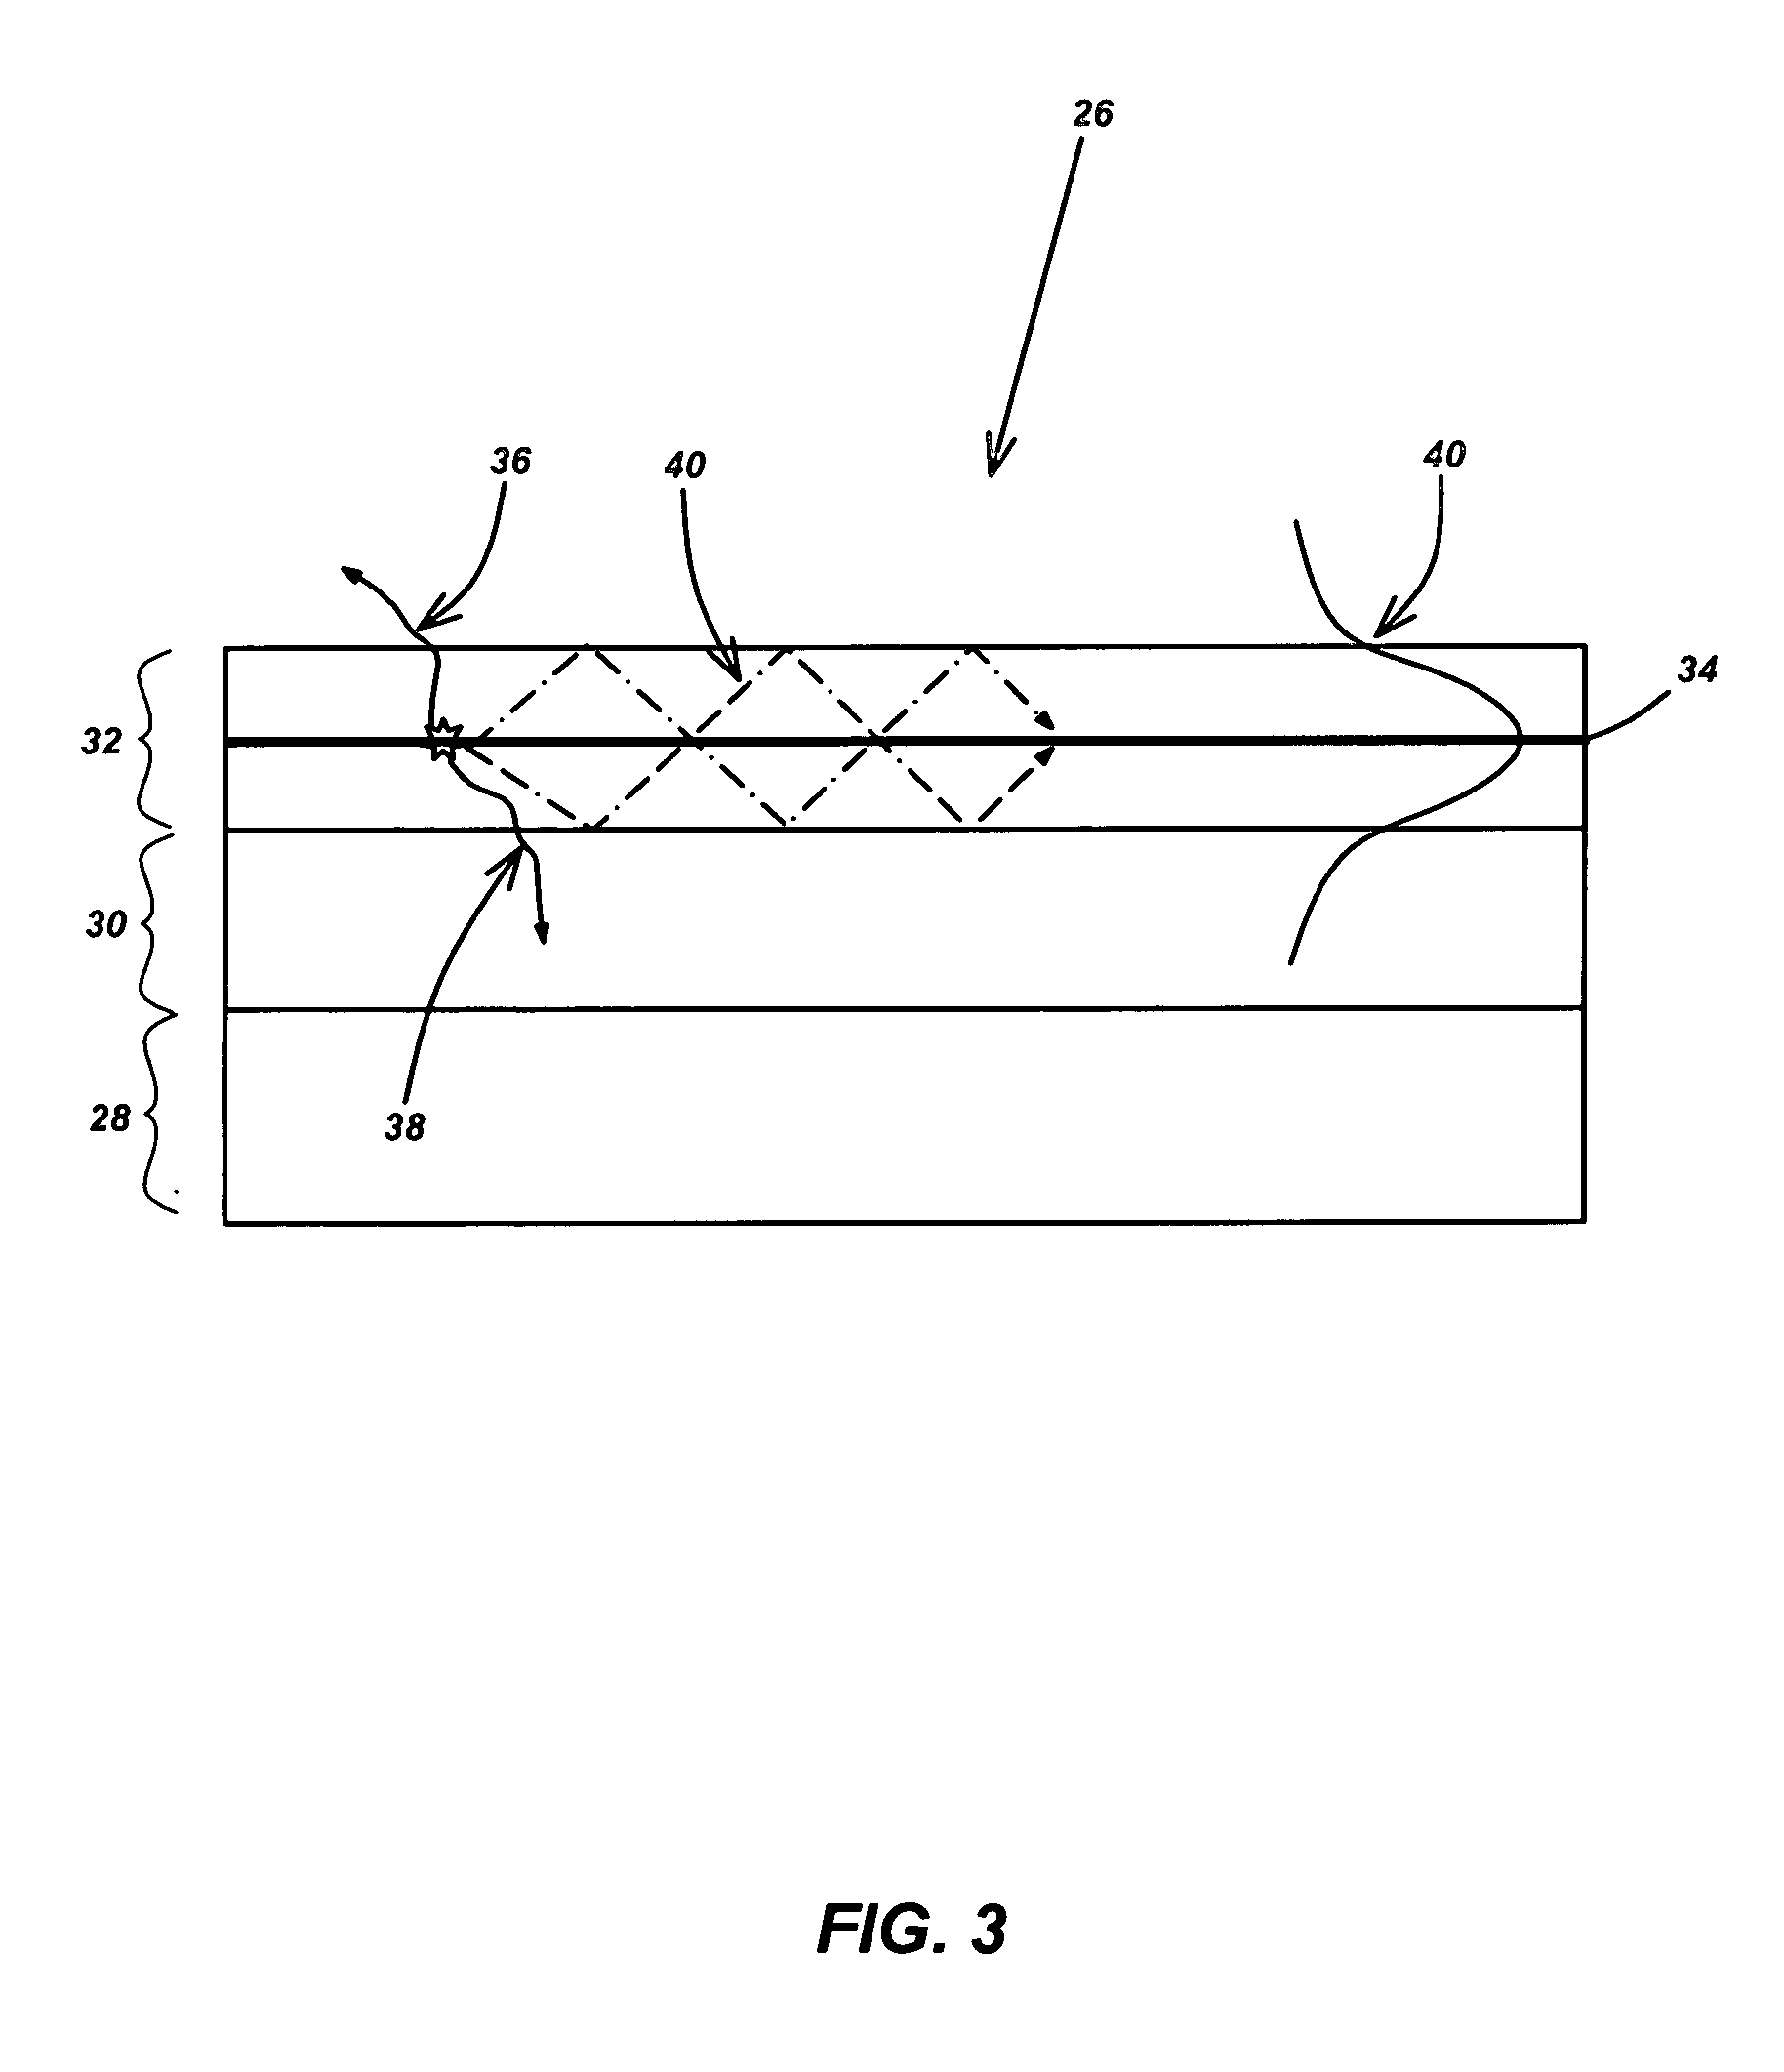 Single or multi-color high efficiency light emitting diode (LED) by growth over a patterned substrate